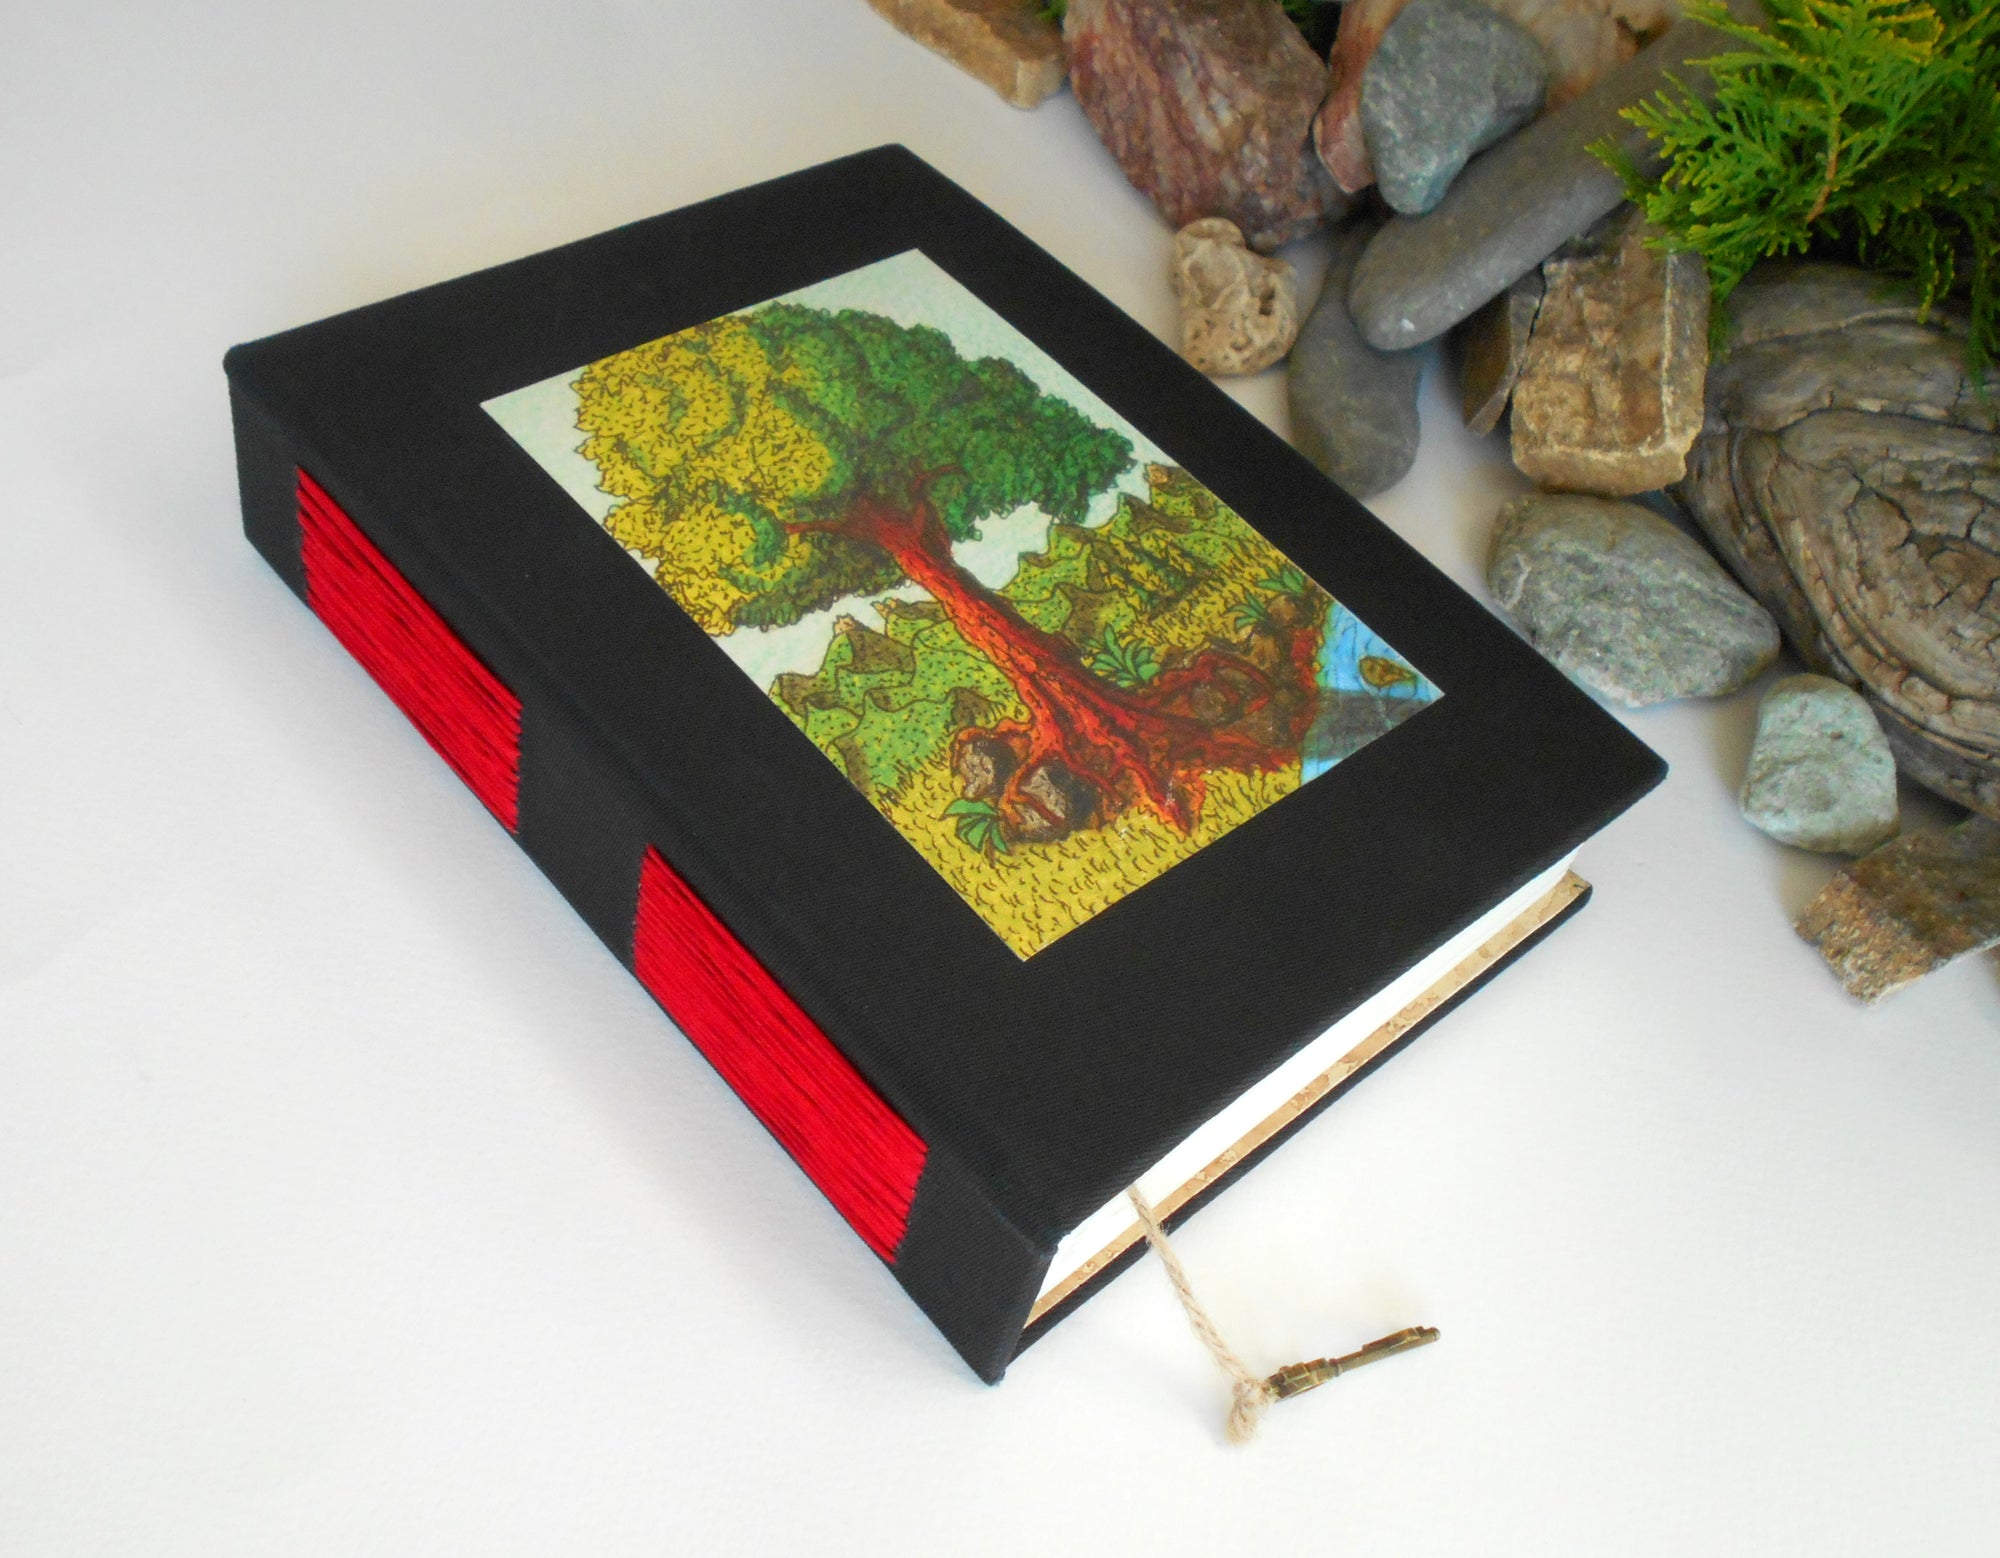 Handmade black fabric journal with 100% recycled pages and a fine art print 'Magical tree'- customised sketchbook journal- inspirational blank book with eco-friendly linen fabric